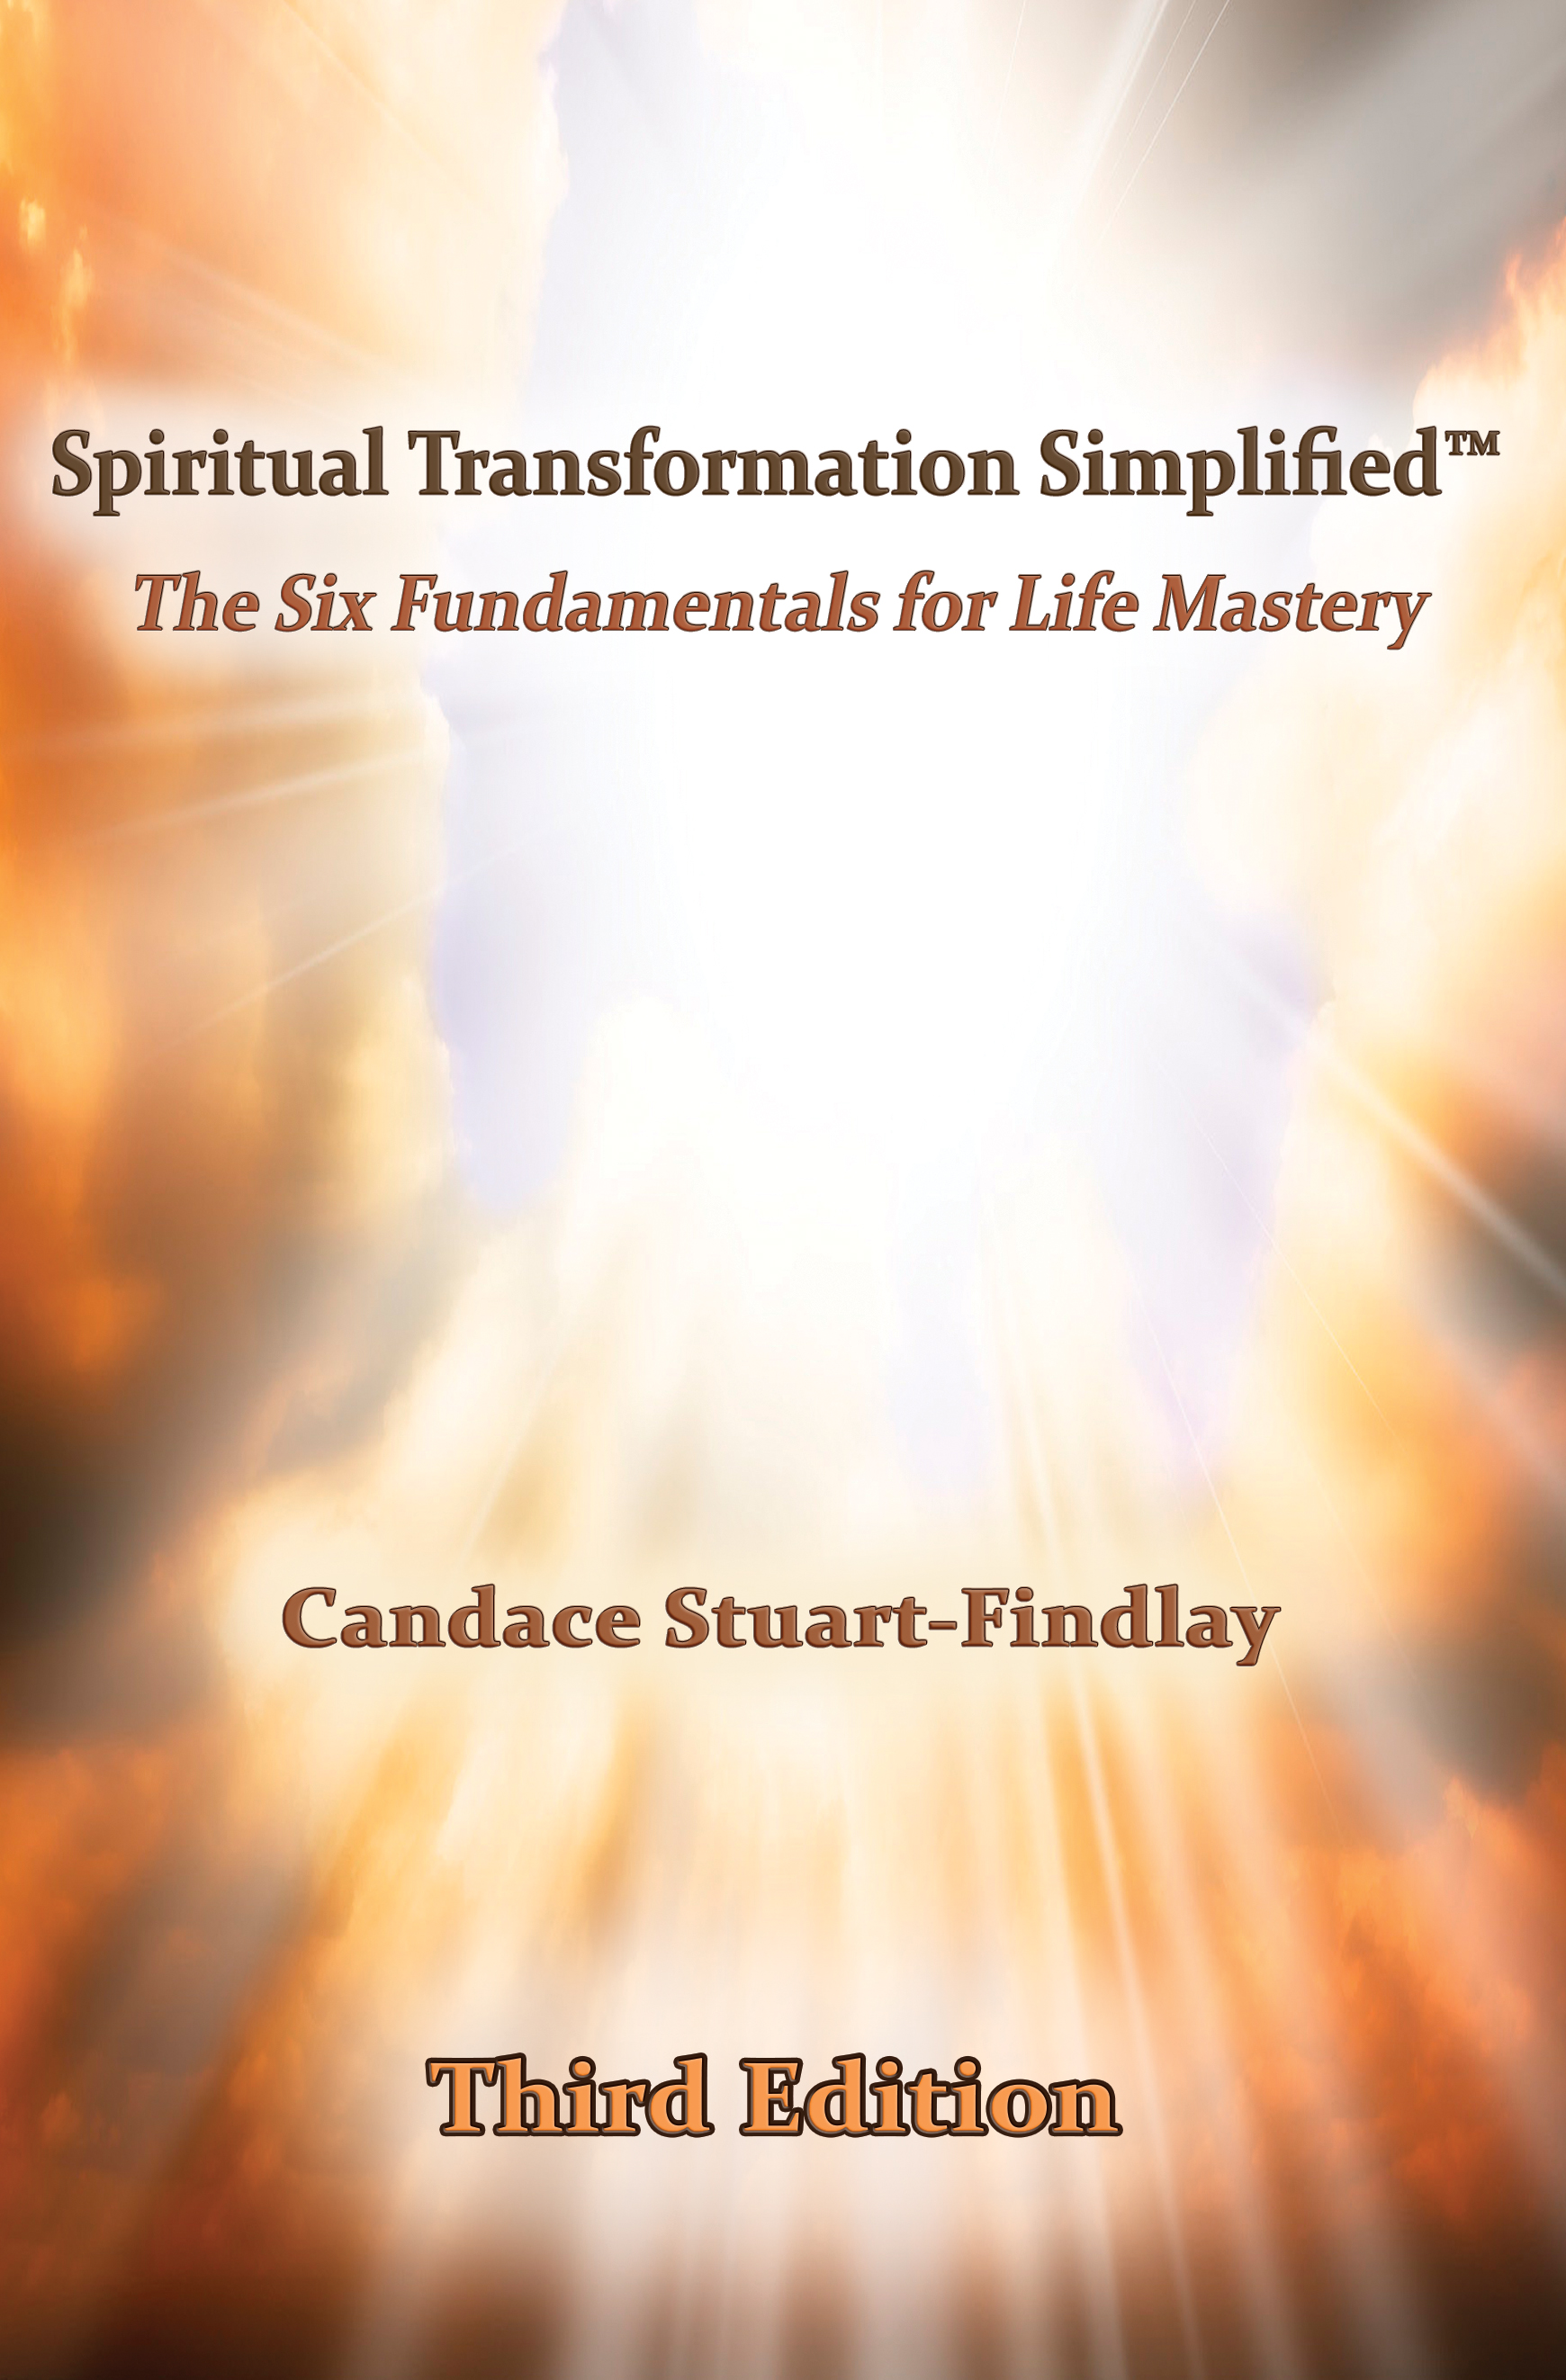 Spiritual Transformation Simplified™ ~ The Six Fundamentals for Life Mastery, Third Edition